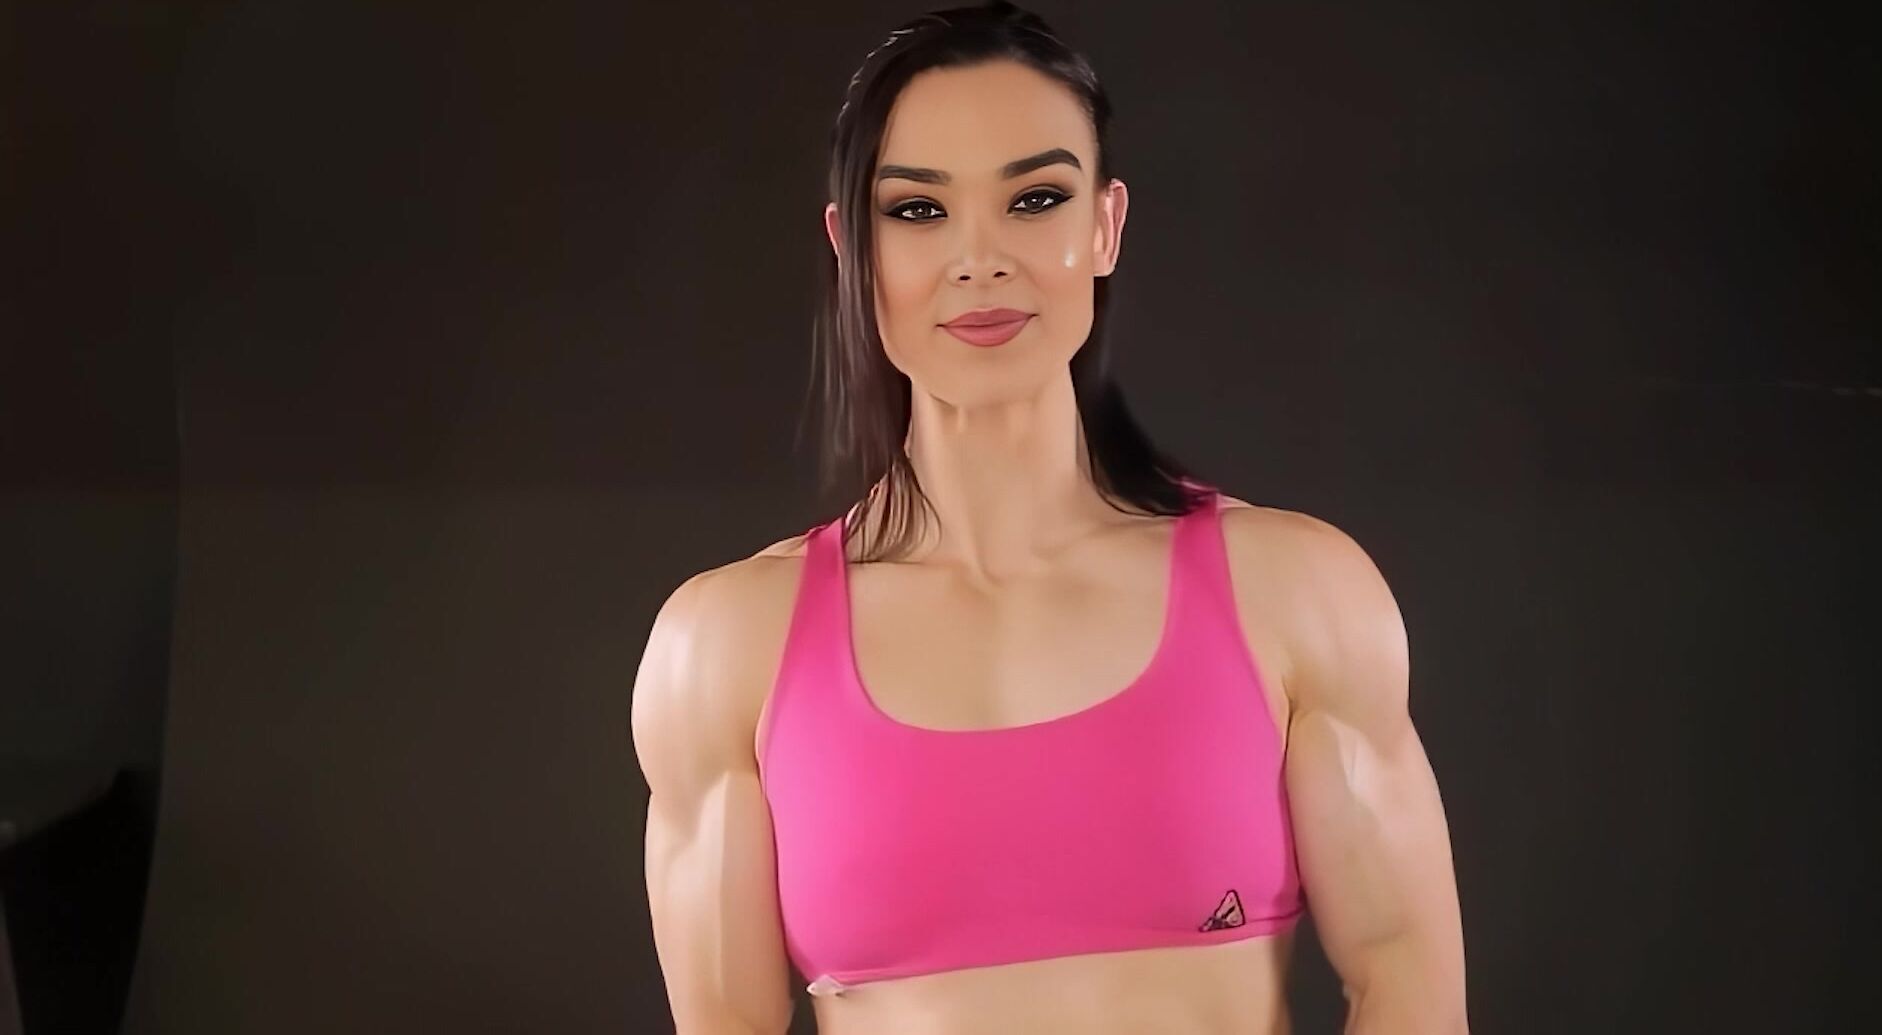 FAKE Hailee Steinfeld muscular. 60fps cust requested